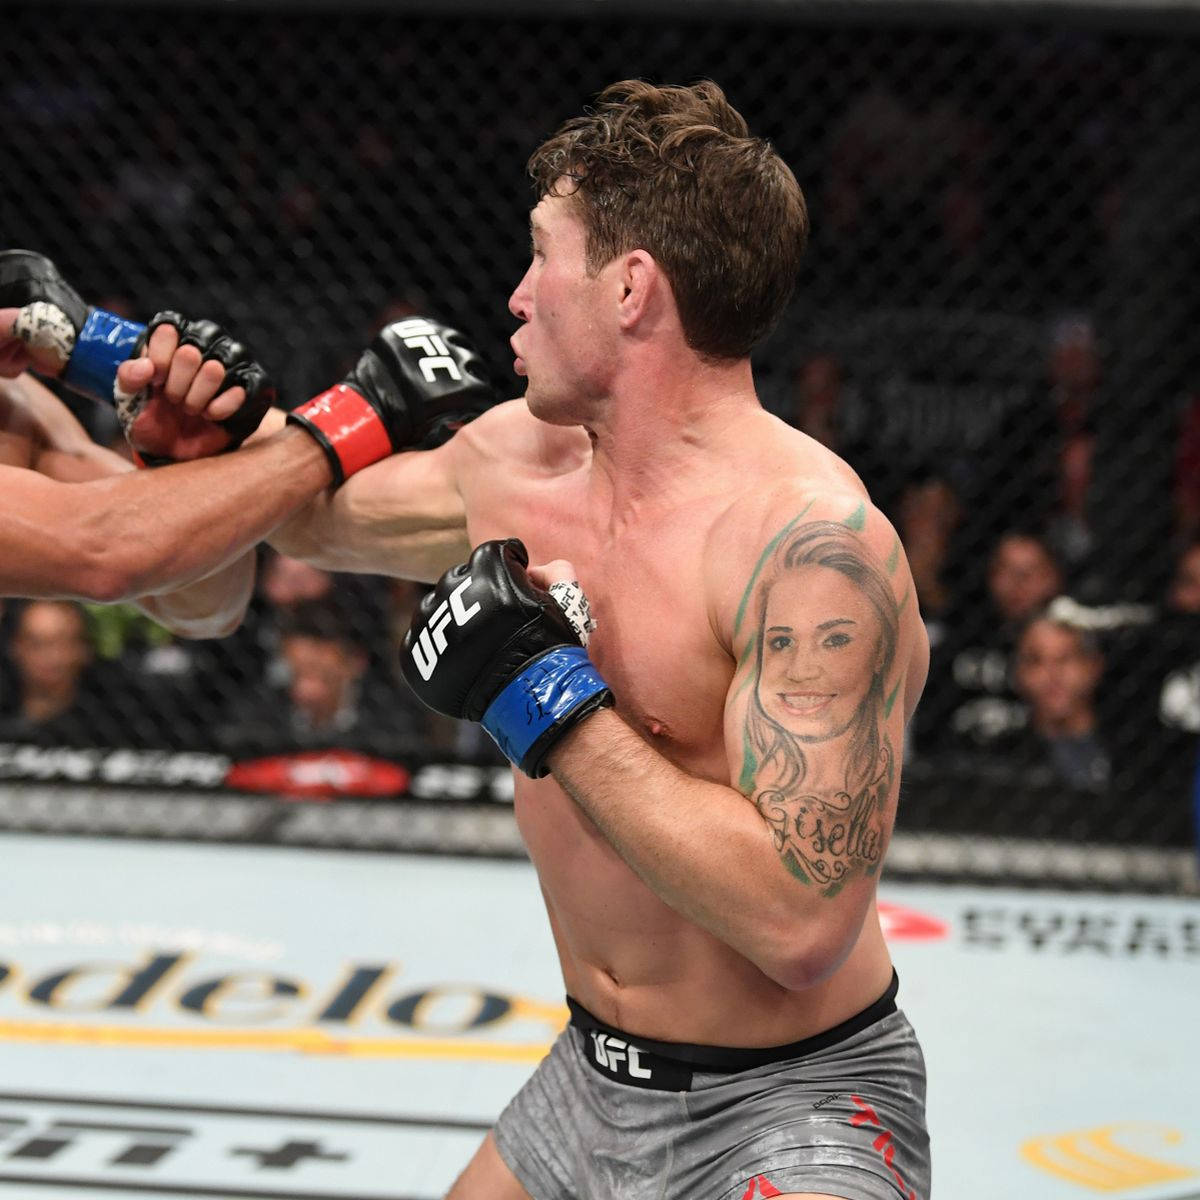 Caption: Darren Till Caught in Fast-Paced Fight Action Wallpaper